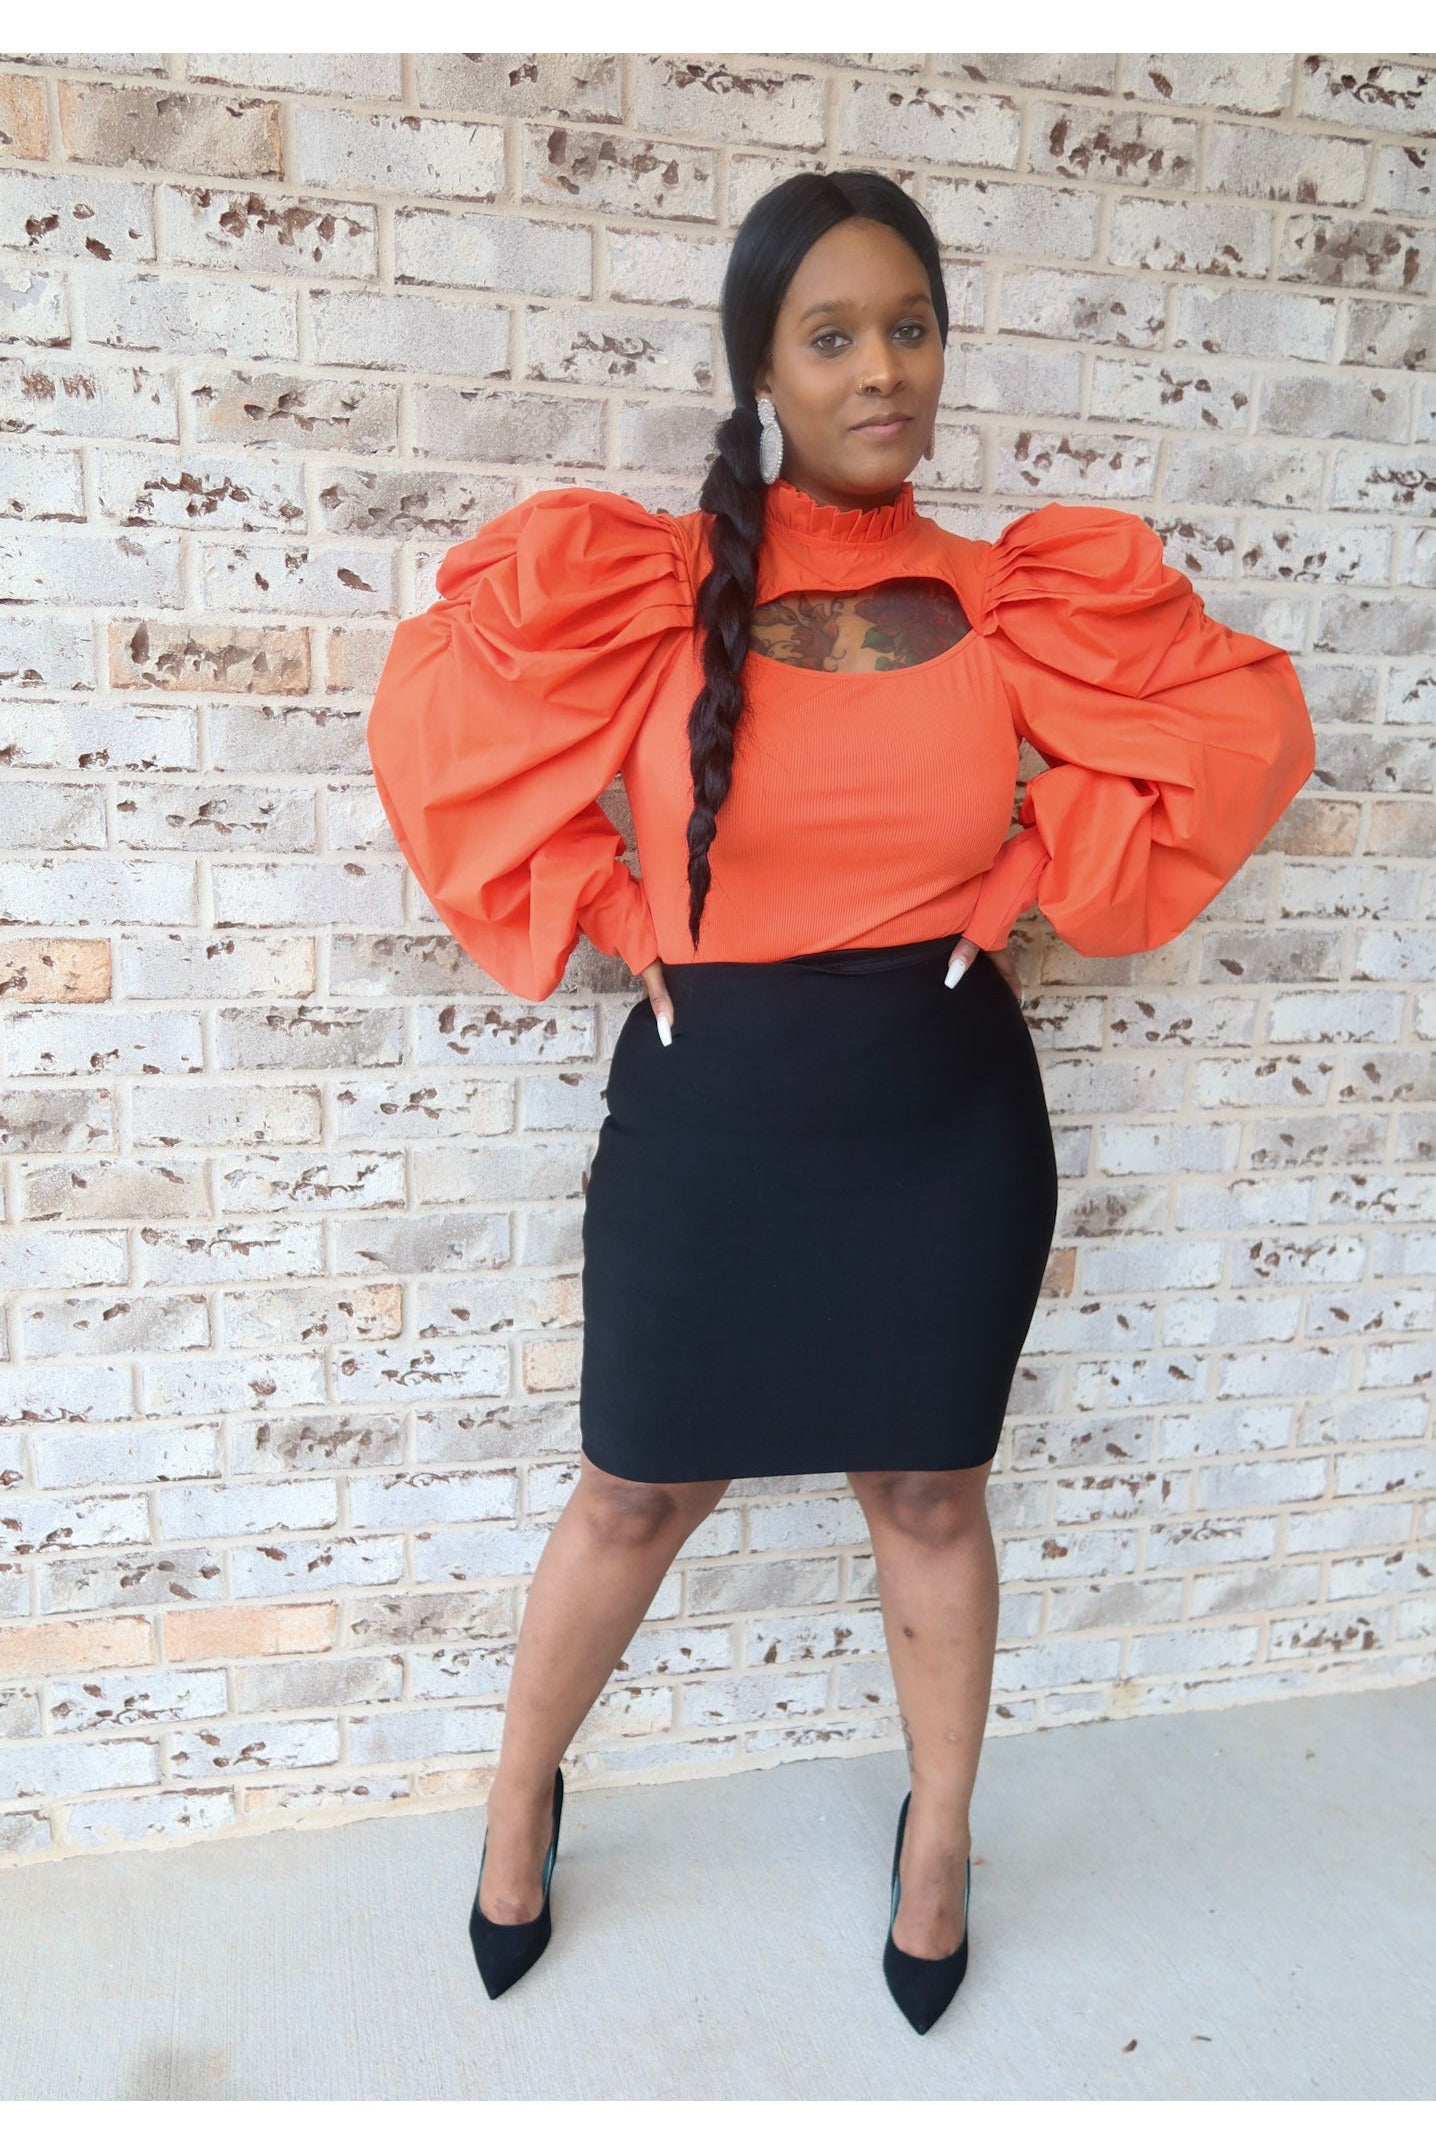 COUTURE STYLE PUFFY ORANGE LONG SLEEVE TOP